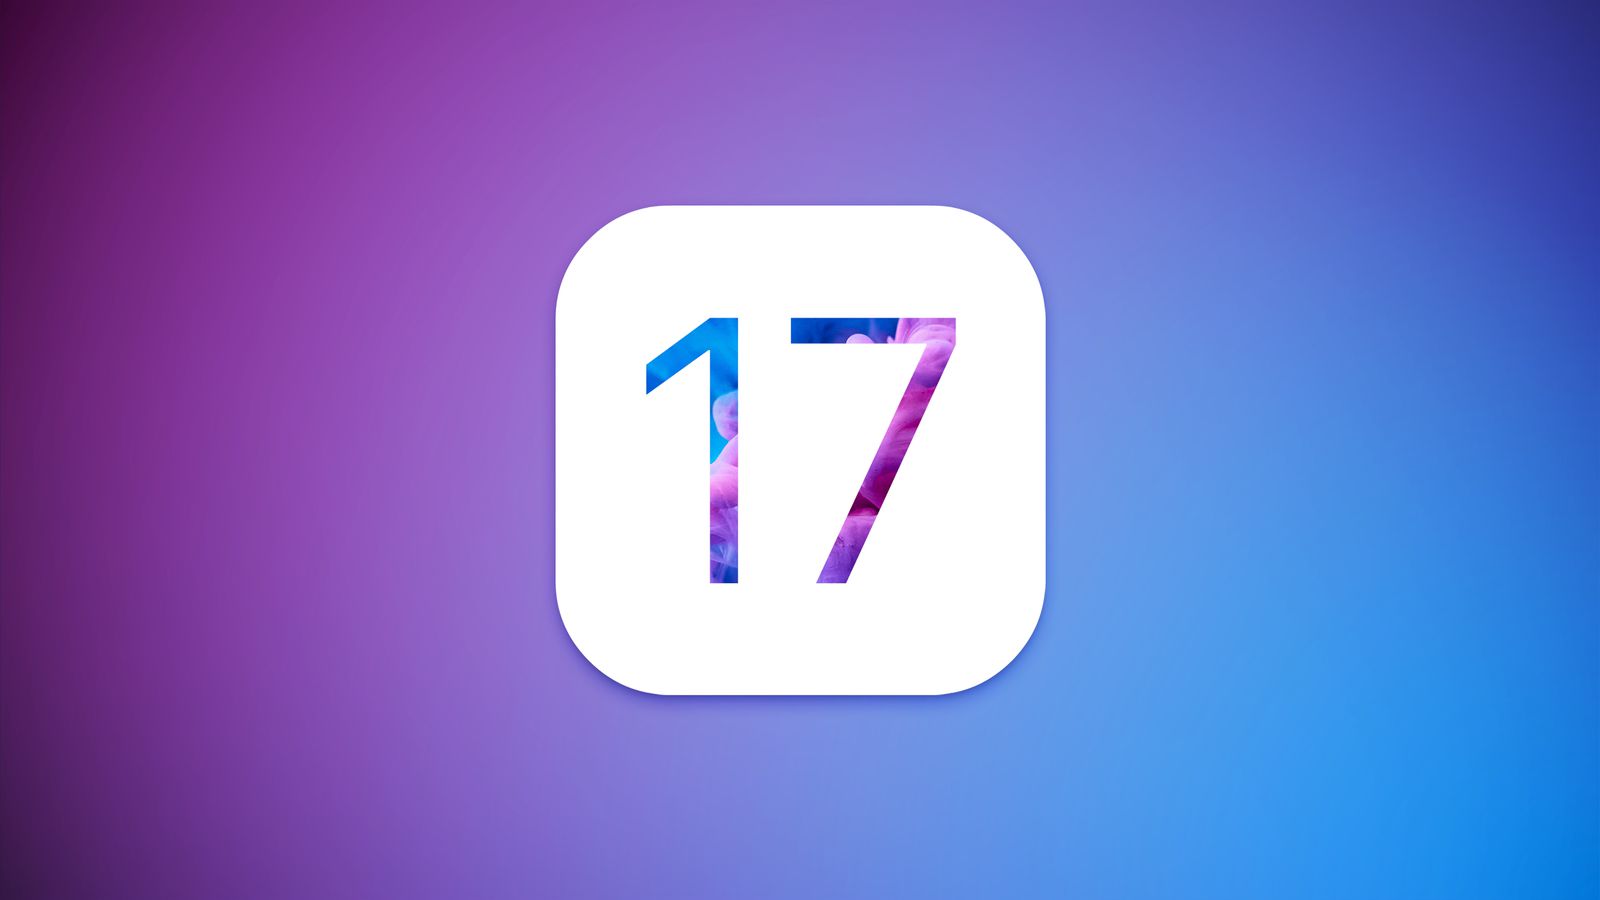 iOS 17 Coming Later This Year: Here's What to Expect - MacRumors